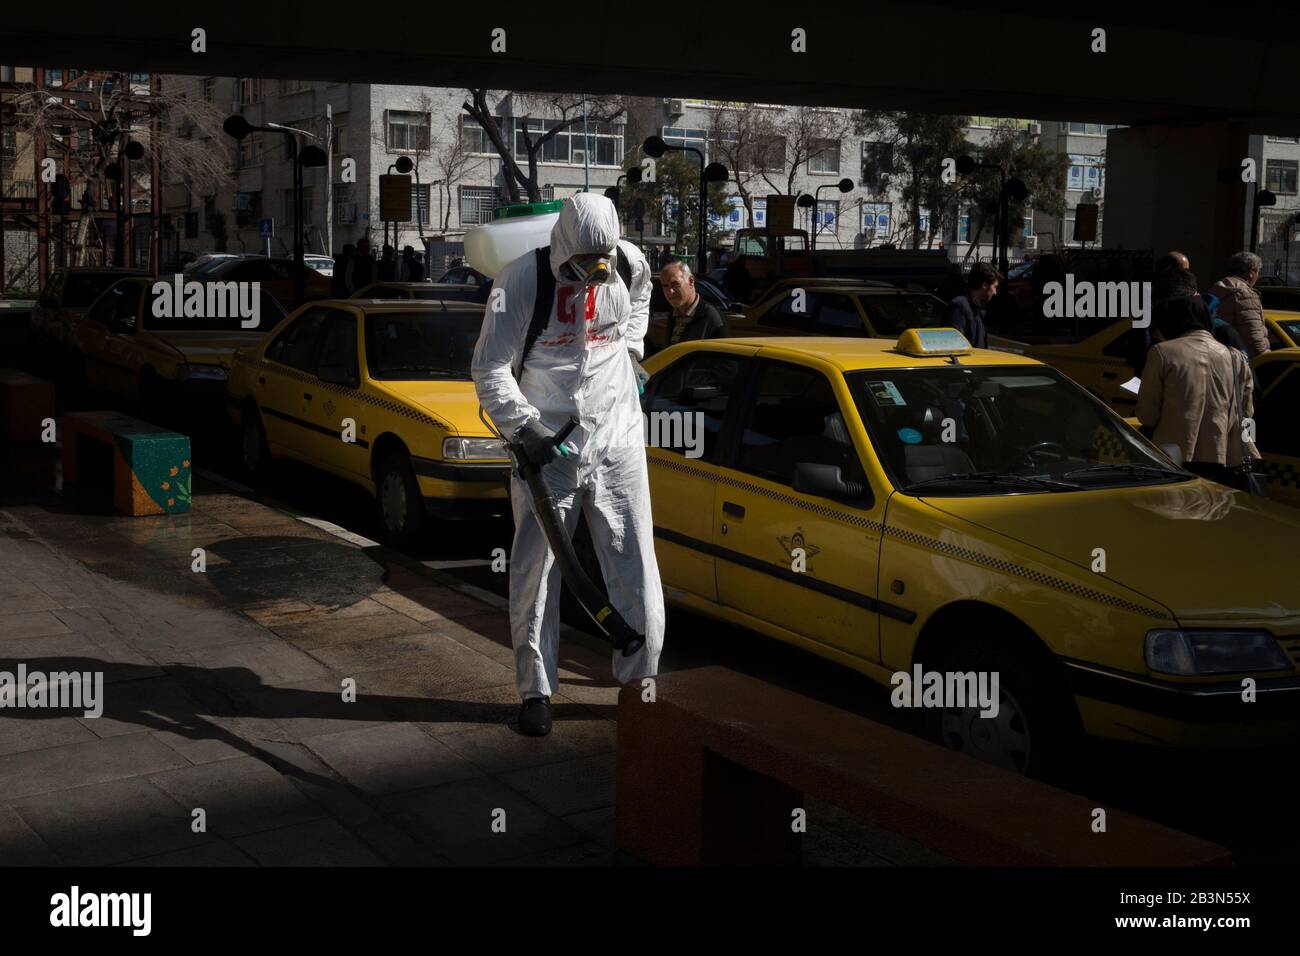 March 5, 2020, Tehran, Iran: Iranian firefighters and municipality workers disinfect a street because of the new coronavirus (COVID-19) in northern Tehran, Iran. Iran today reported 15 new deaths from the novel coronavirus and 591 fresh cases in the past 24 hours, bringing the toll to 107 dead and 3,513 infected. Iran has one of the highest death tolls in the world from the new coronavirus outside of China, the epicenter of the outbreak. (Credit Image: © Rouzbeh Fouladi/ZUMA Wire) Stock Photo